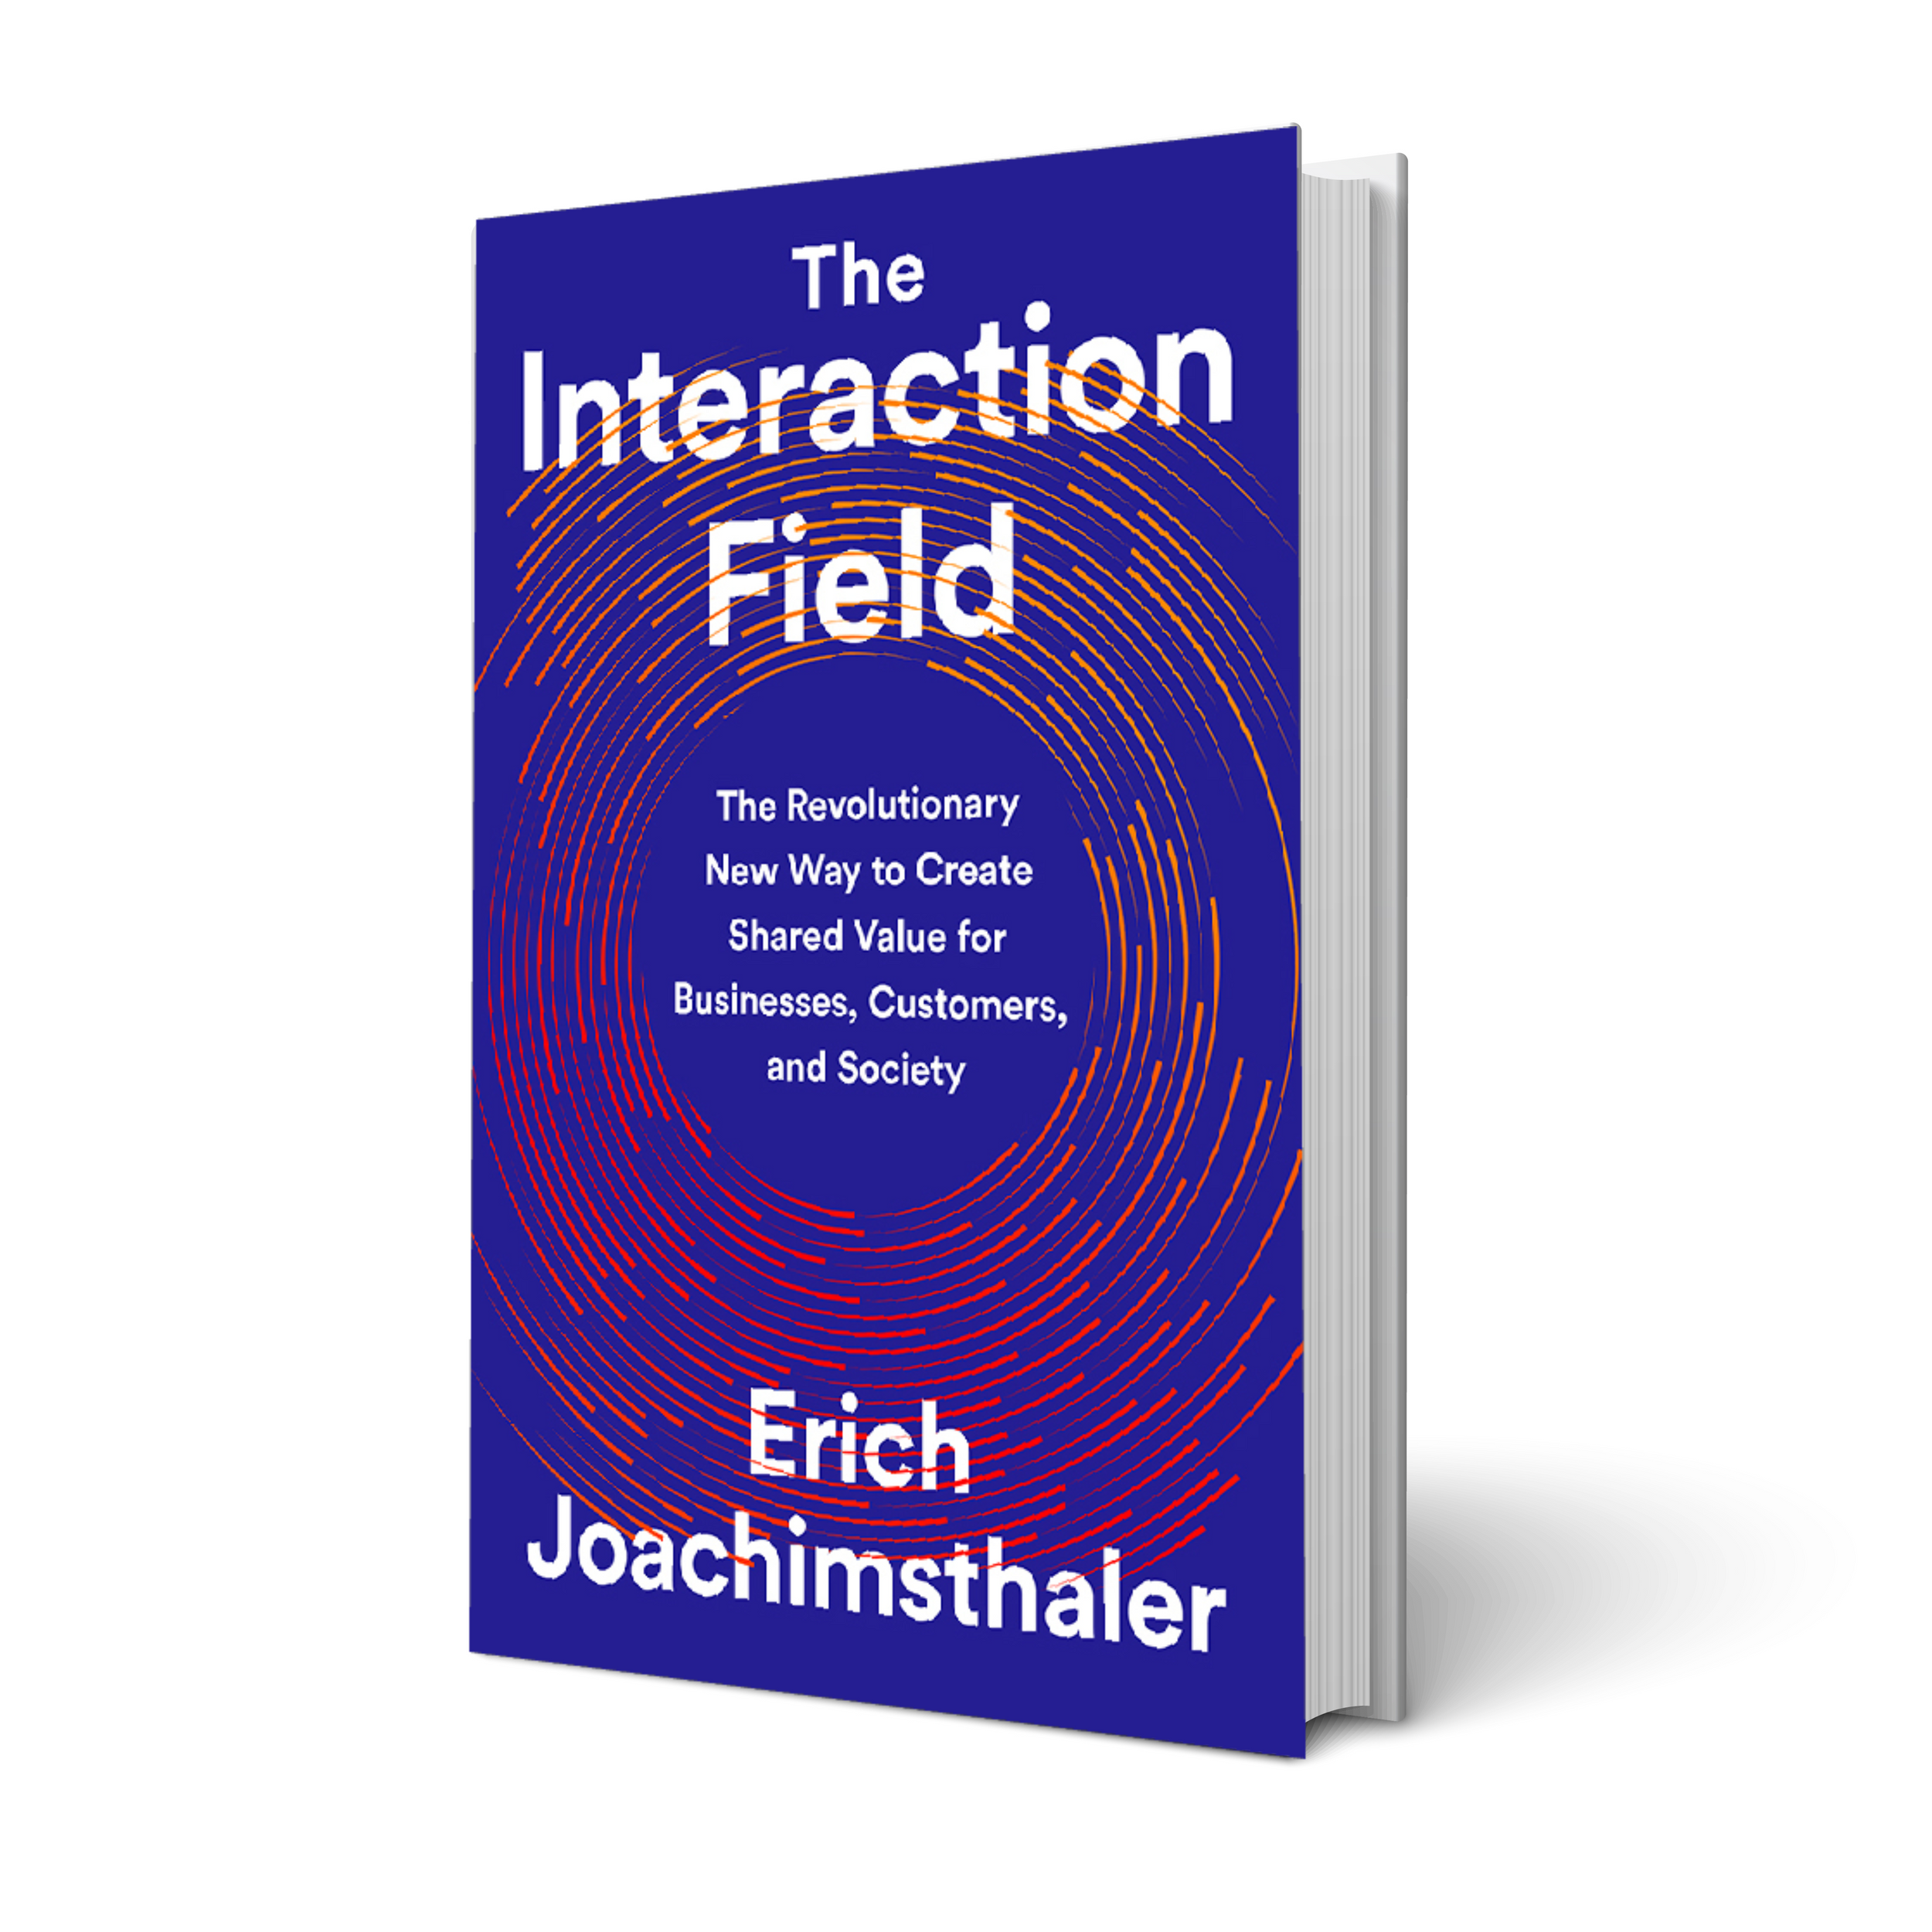 The interaction field book